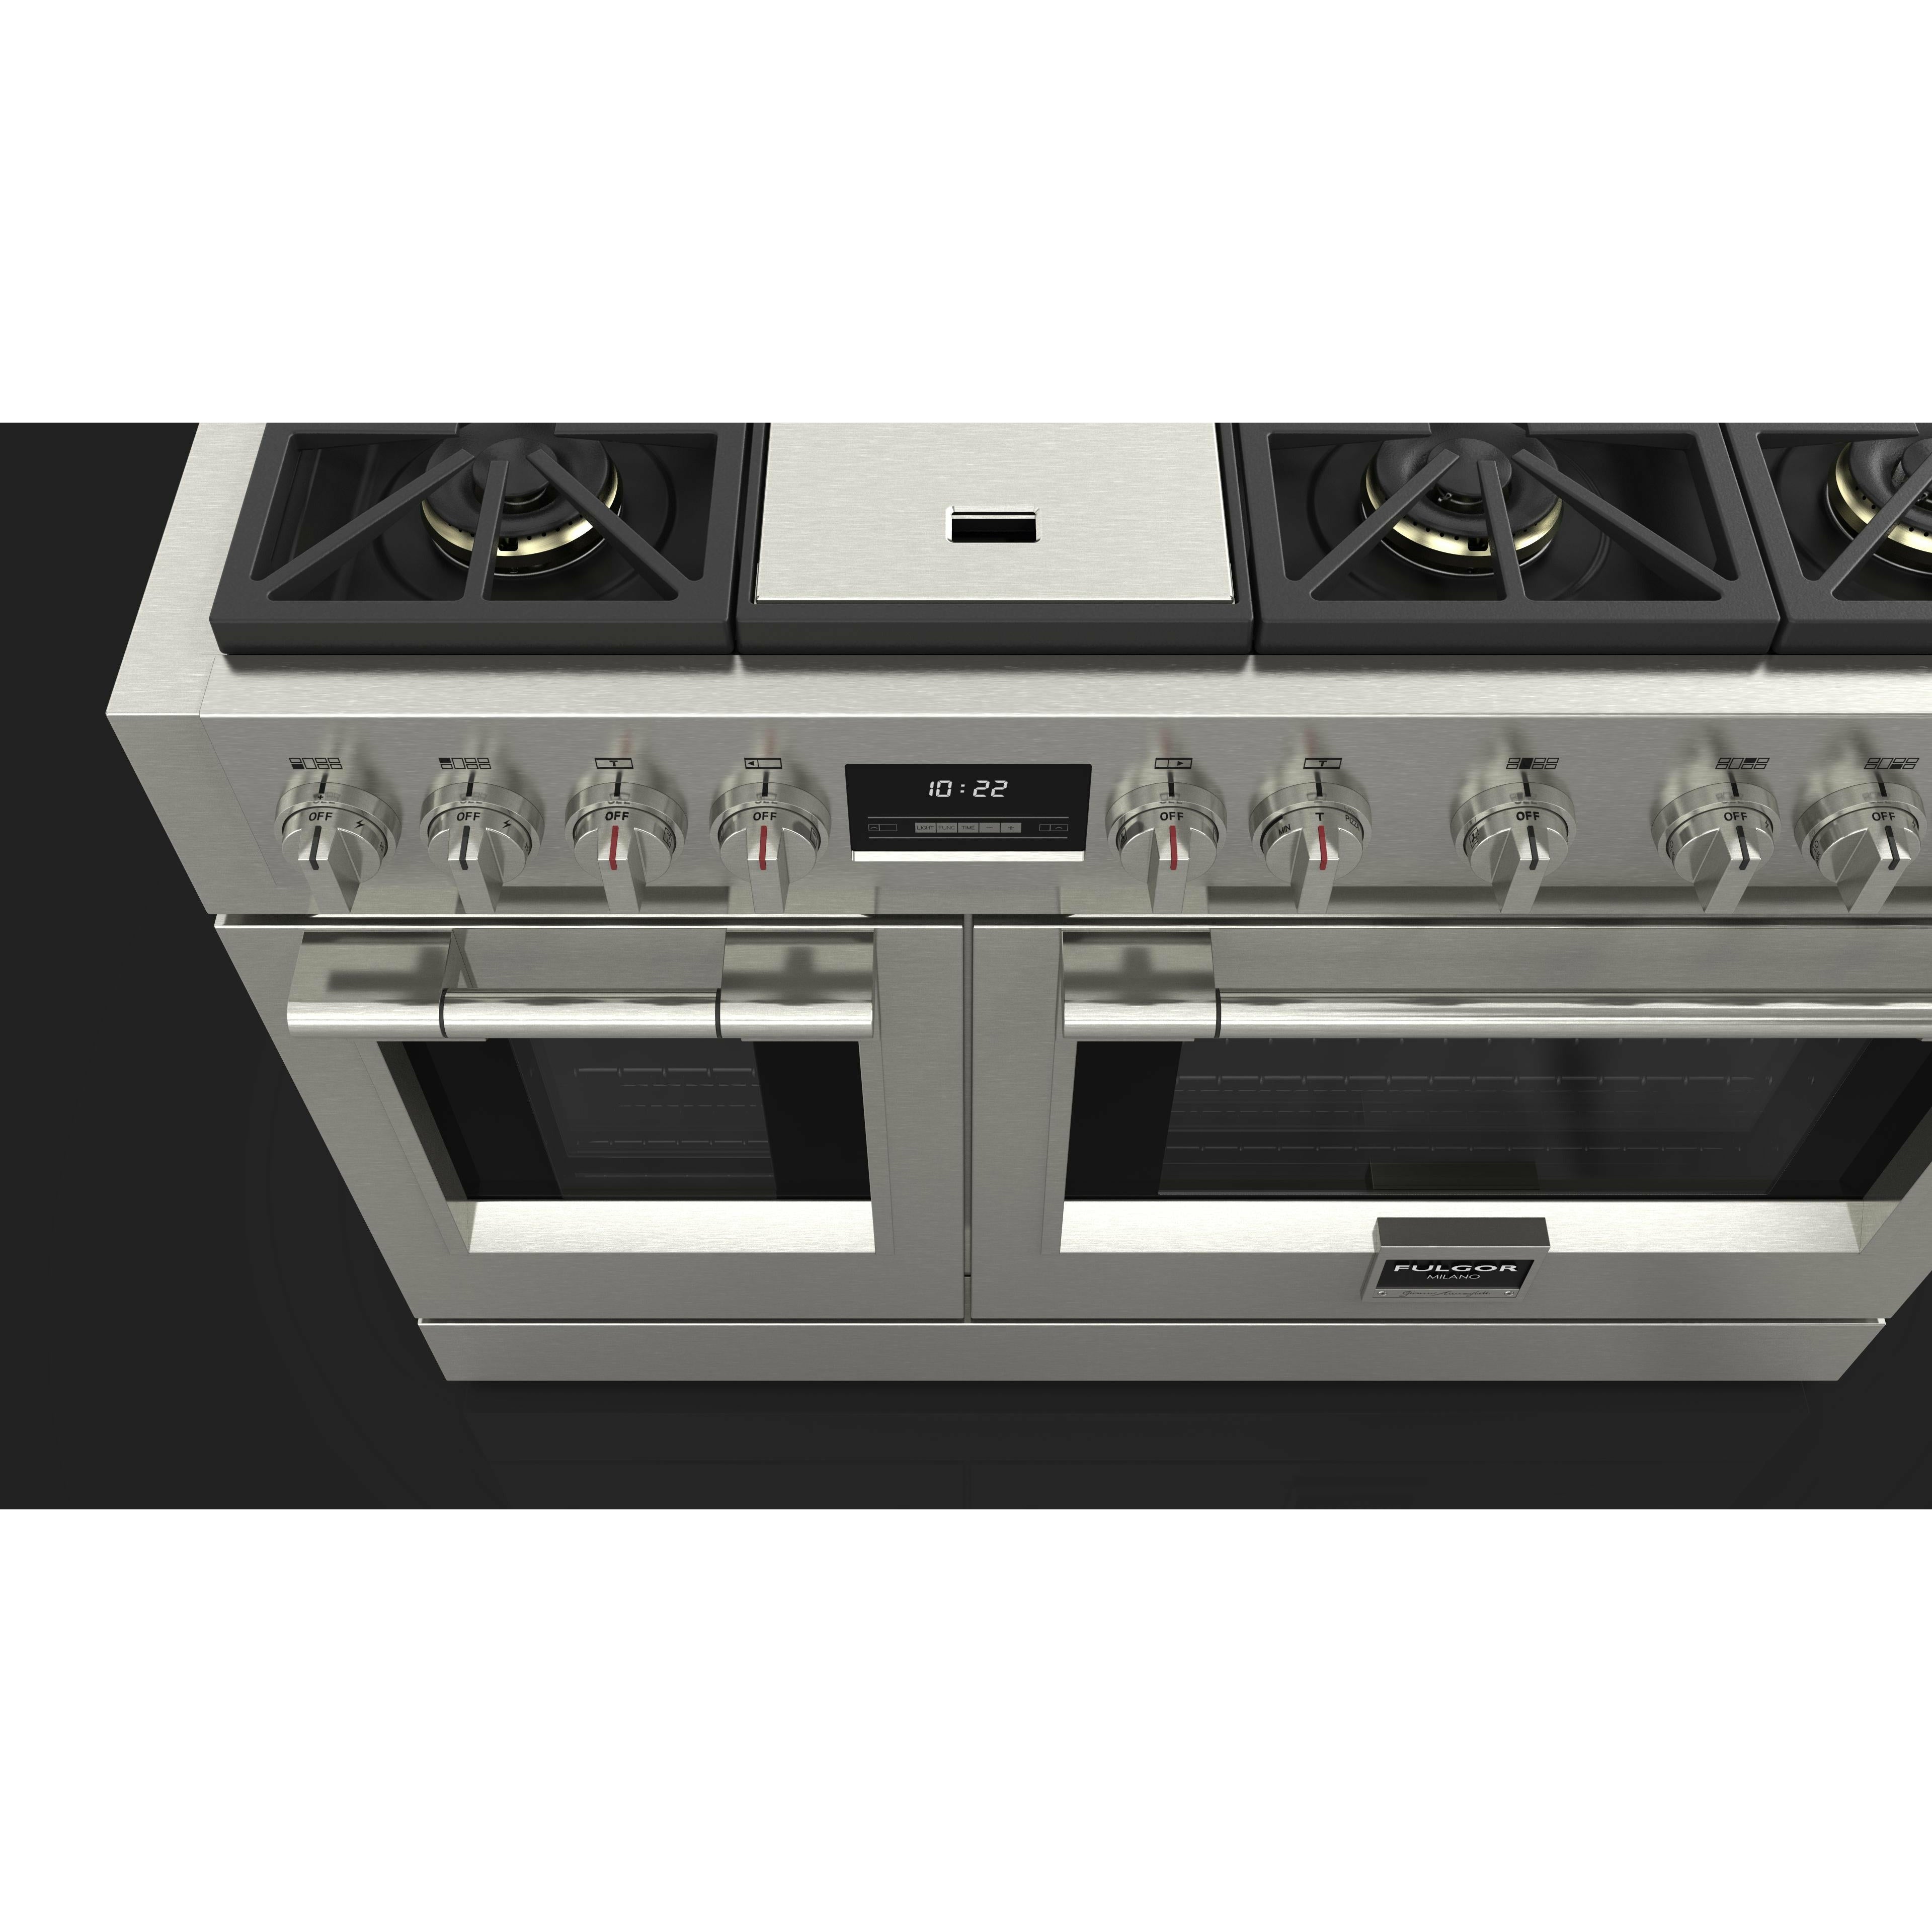 Fulgor Milano 48" Freestanding Professional All Gas Range with 6 Dual Flame Sealed Burners, Stainless Steel - F6PGR486GS2